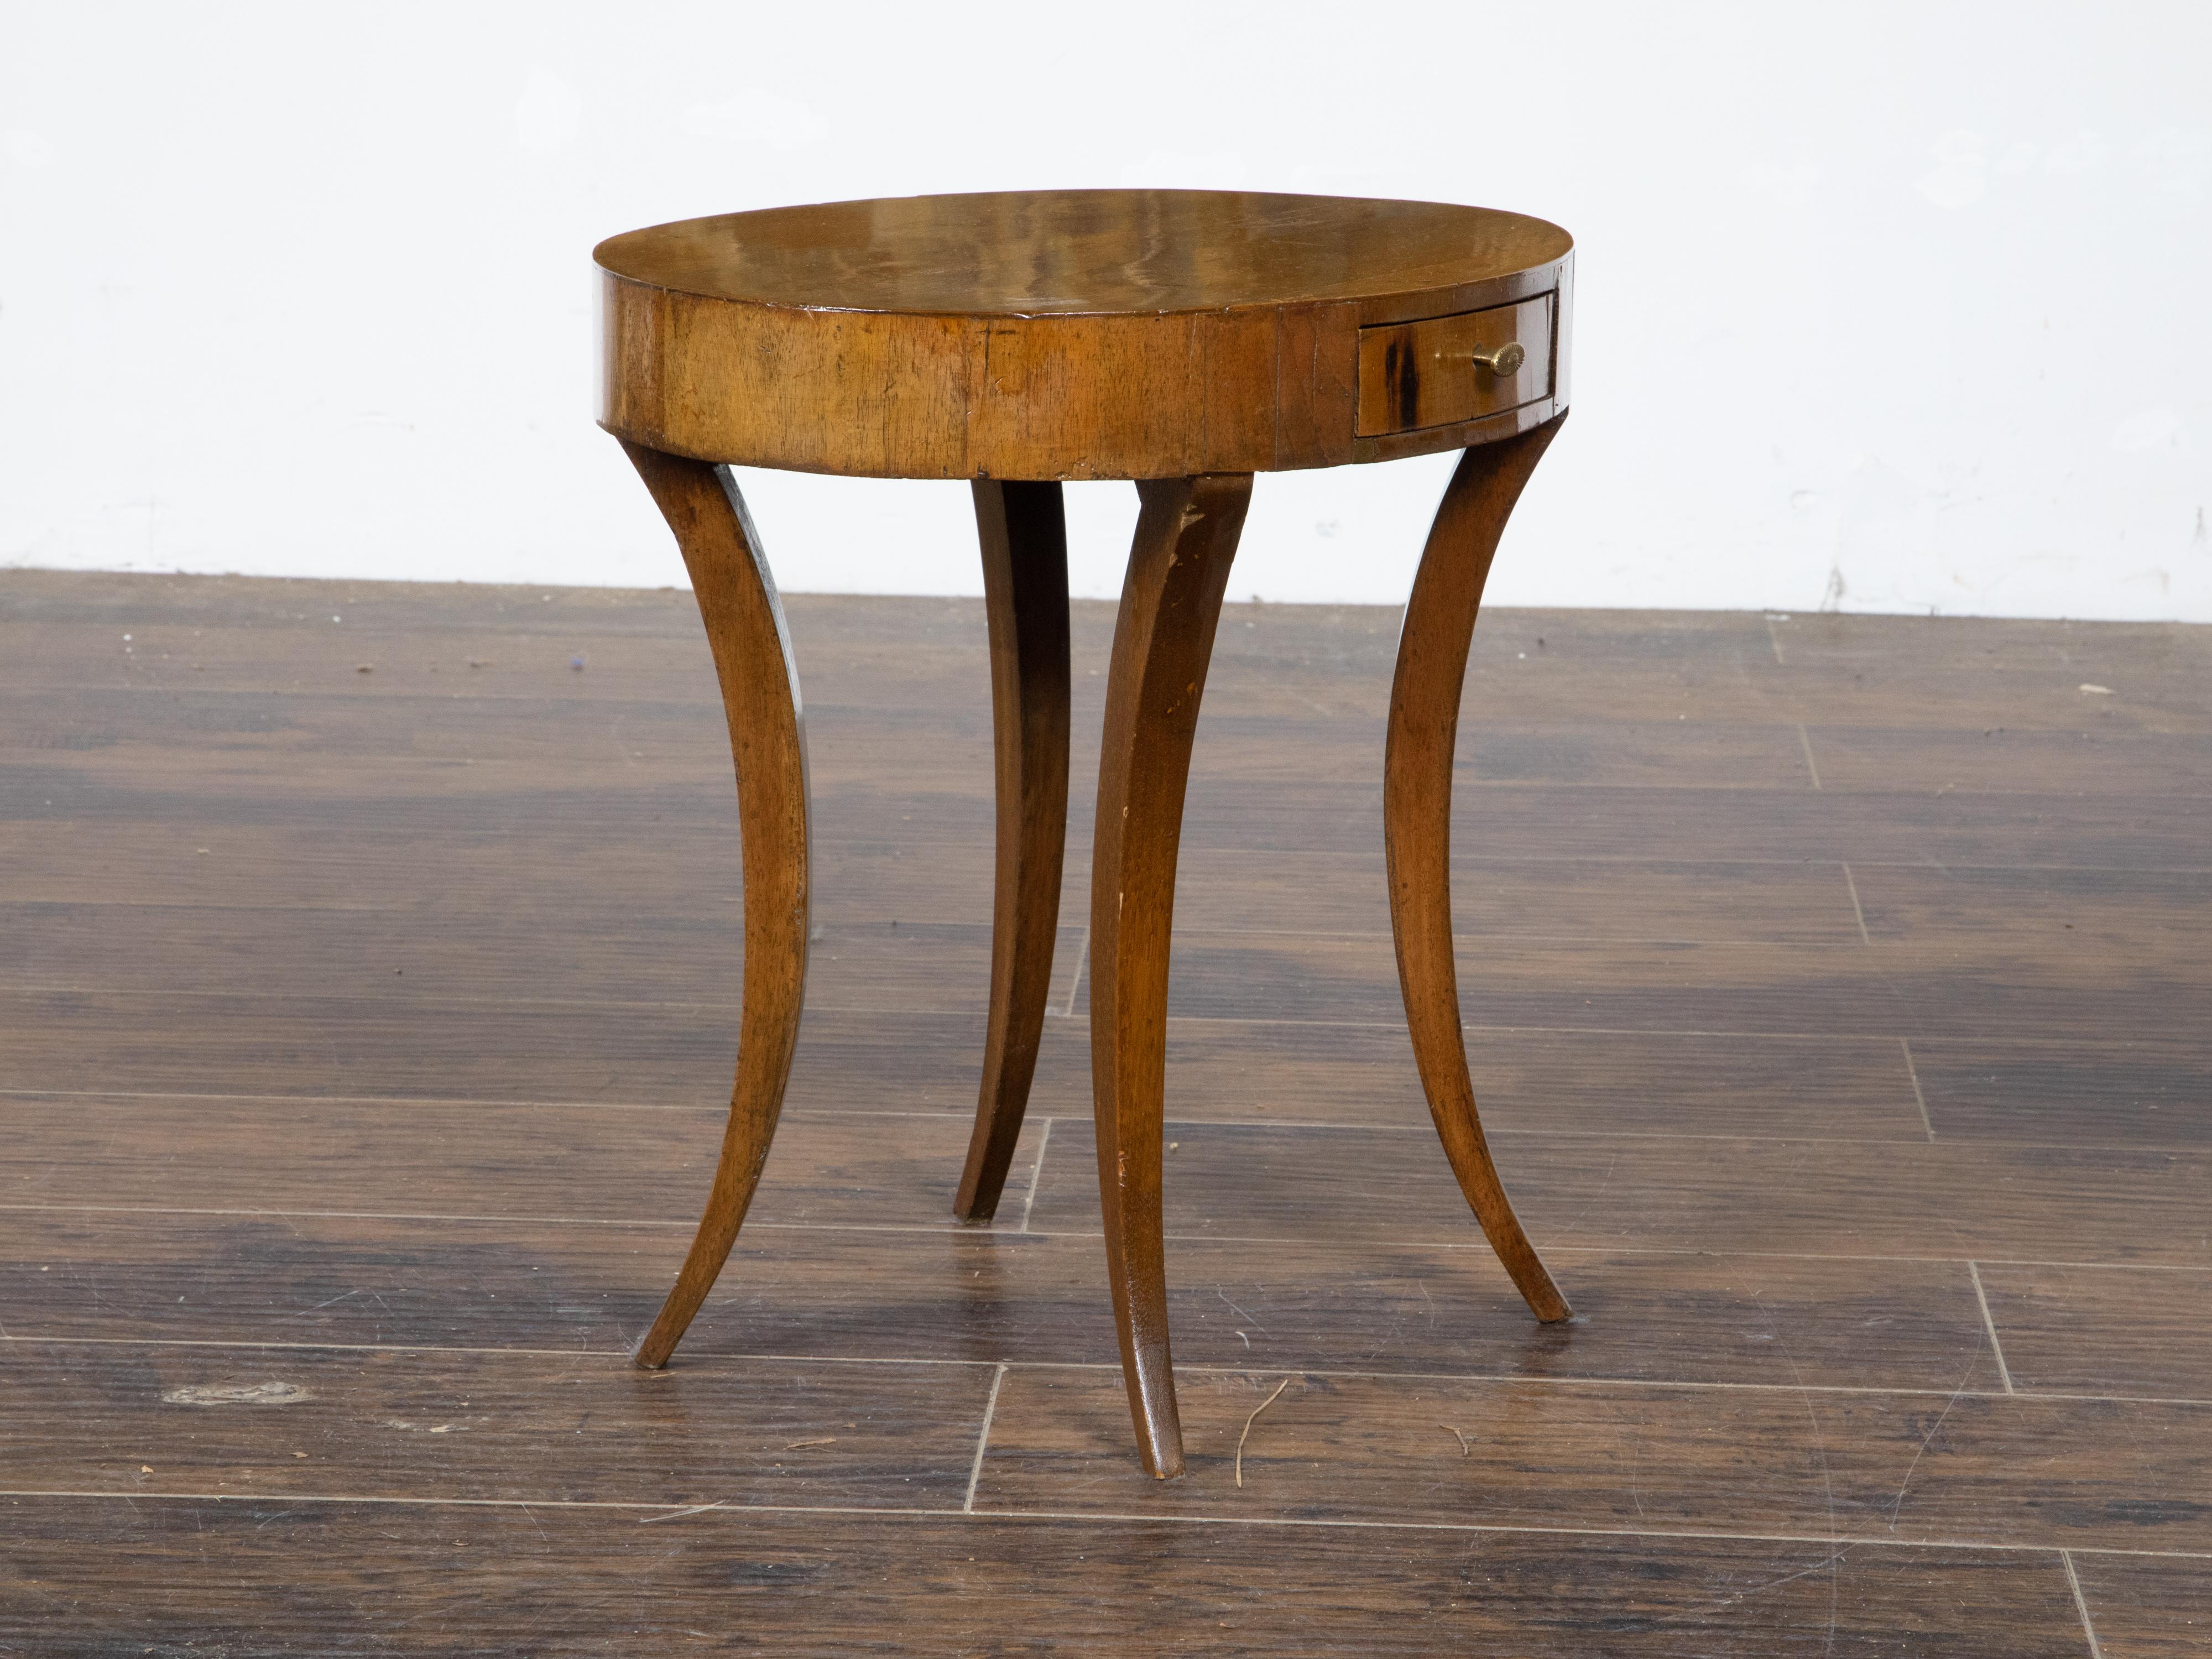 An Italian Neoclassical walnut veneered accent table from the early 19th century, with oval top, single drawer, brass hardware and saber legs. Created in Italy during the early years of the 19th century, this walnut accent table features an oval top